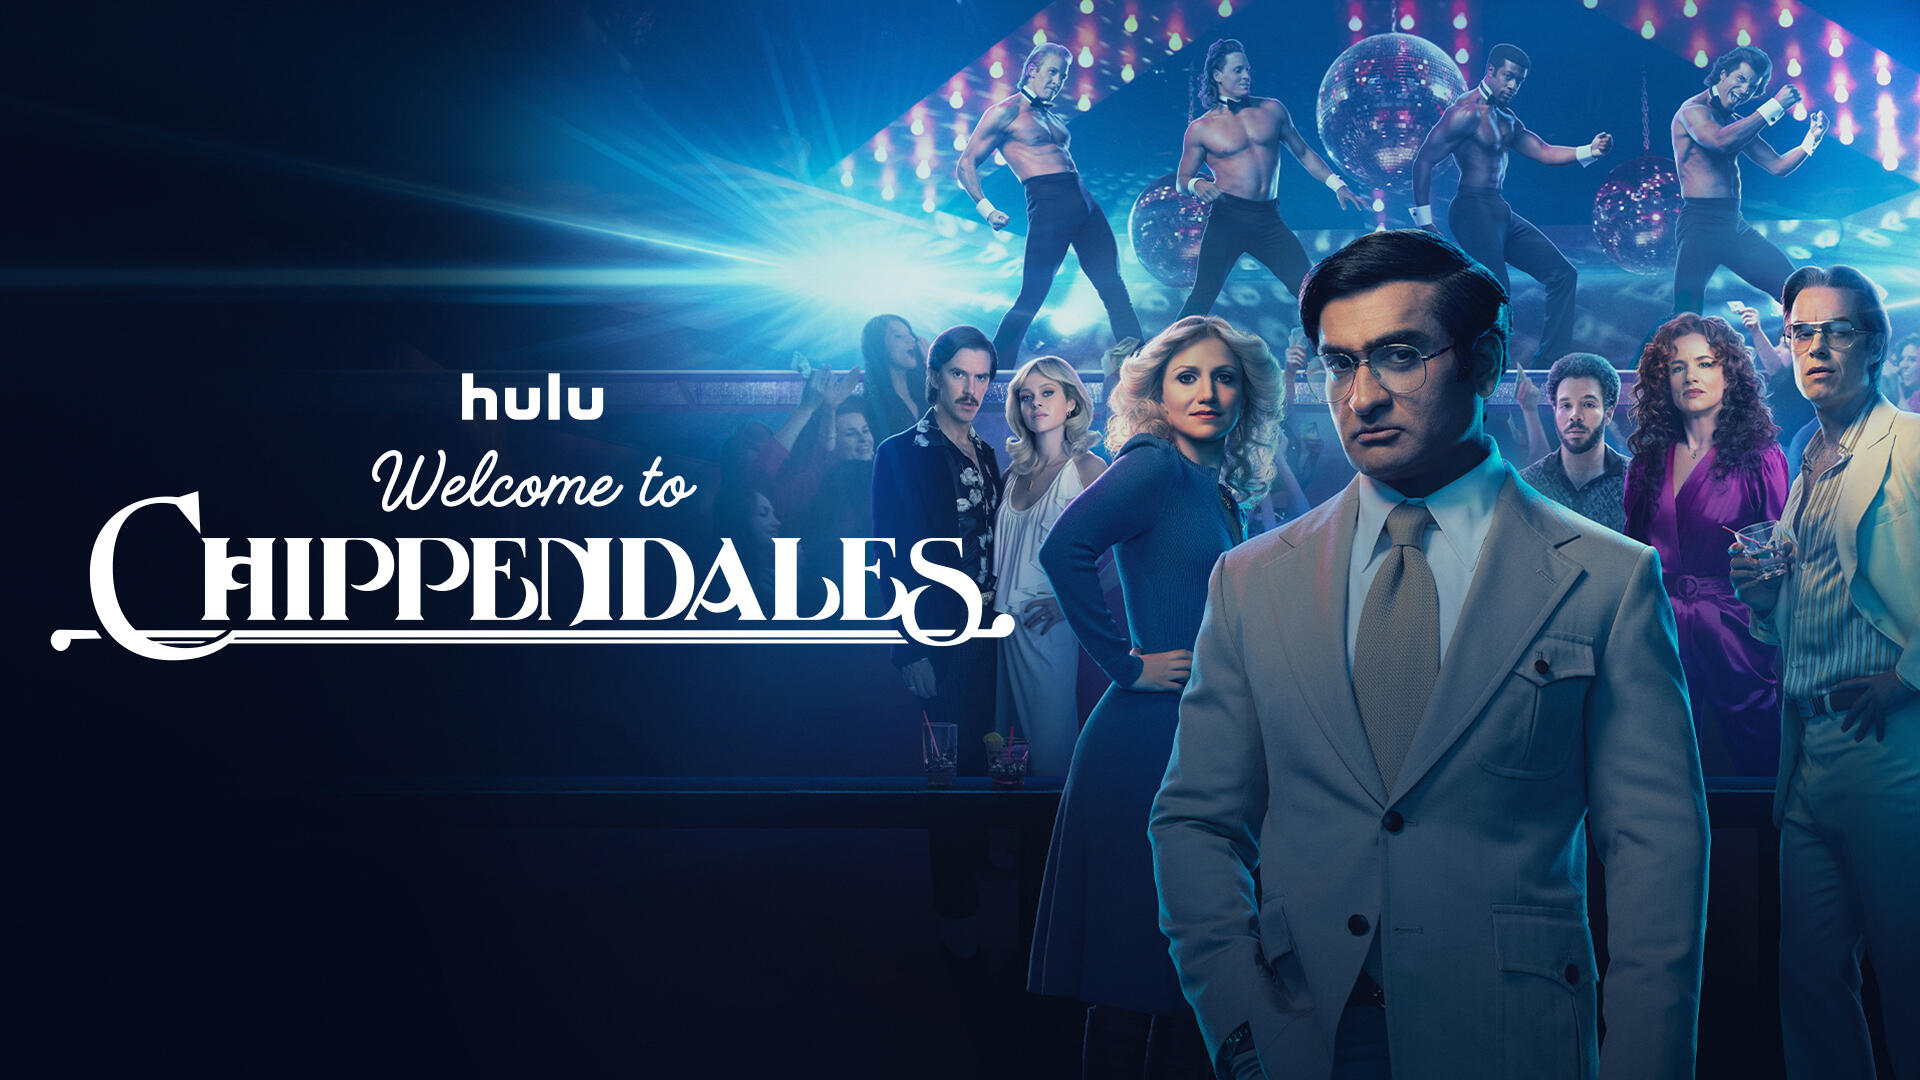 Welcome to Chippendales -- A sprawling true-crime saga, “Welcome to Chippendales” tells the outrageous story of Somen “Steve” Banerjee, an Indian immigrant who became the unlikely founder of the world’s greatest male-stripping empire—and let nothing stand in his way in the process. (Courtesy of Hulu)